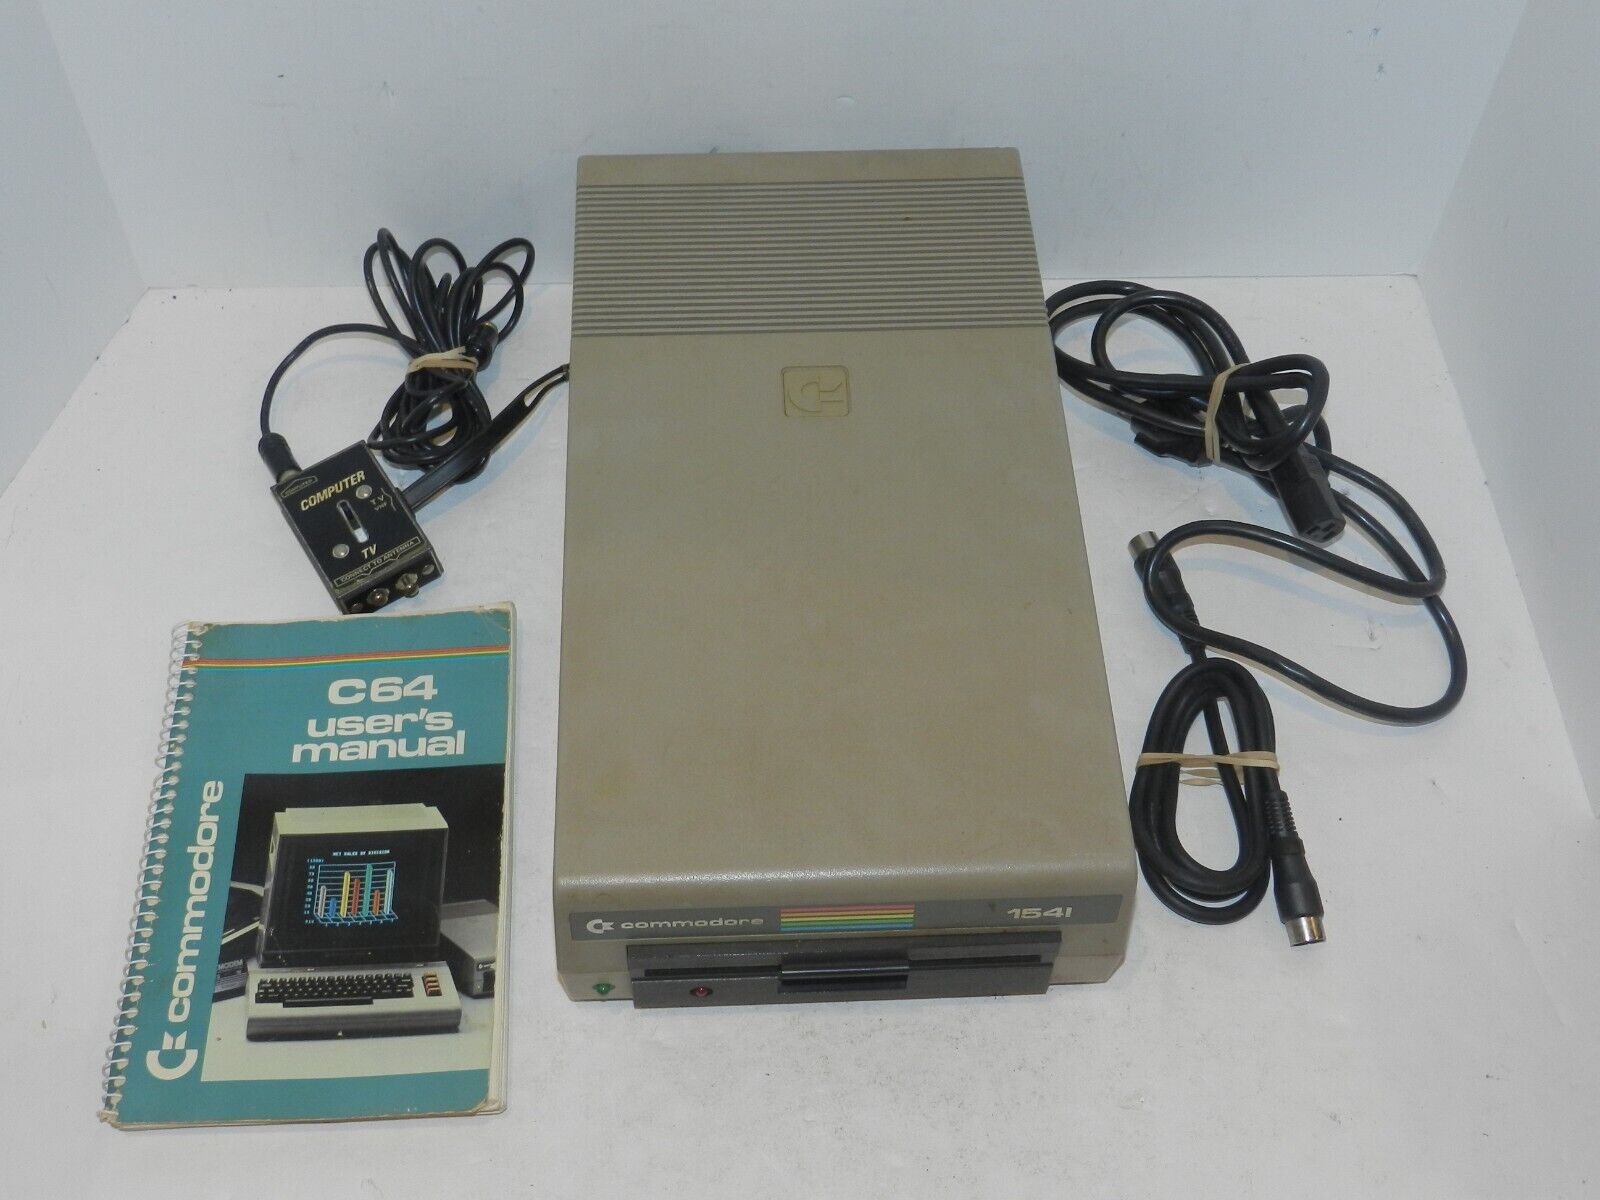 Commodore 64 C-64 Computer Model 1541 Floppy Disk Drive w/ Power Cord Tested